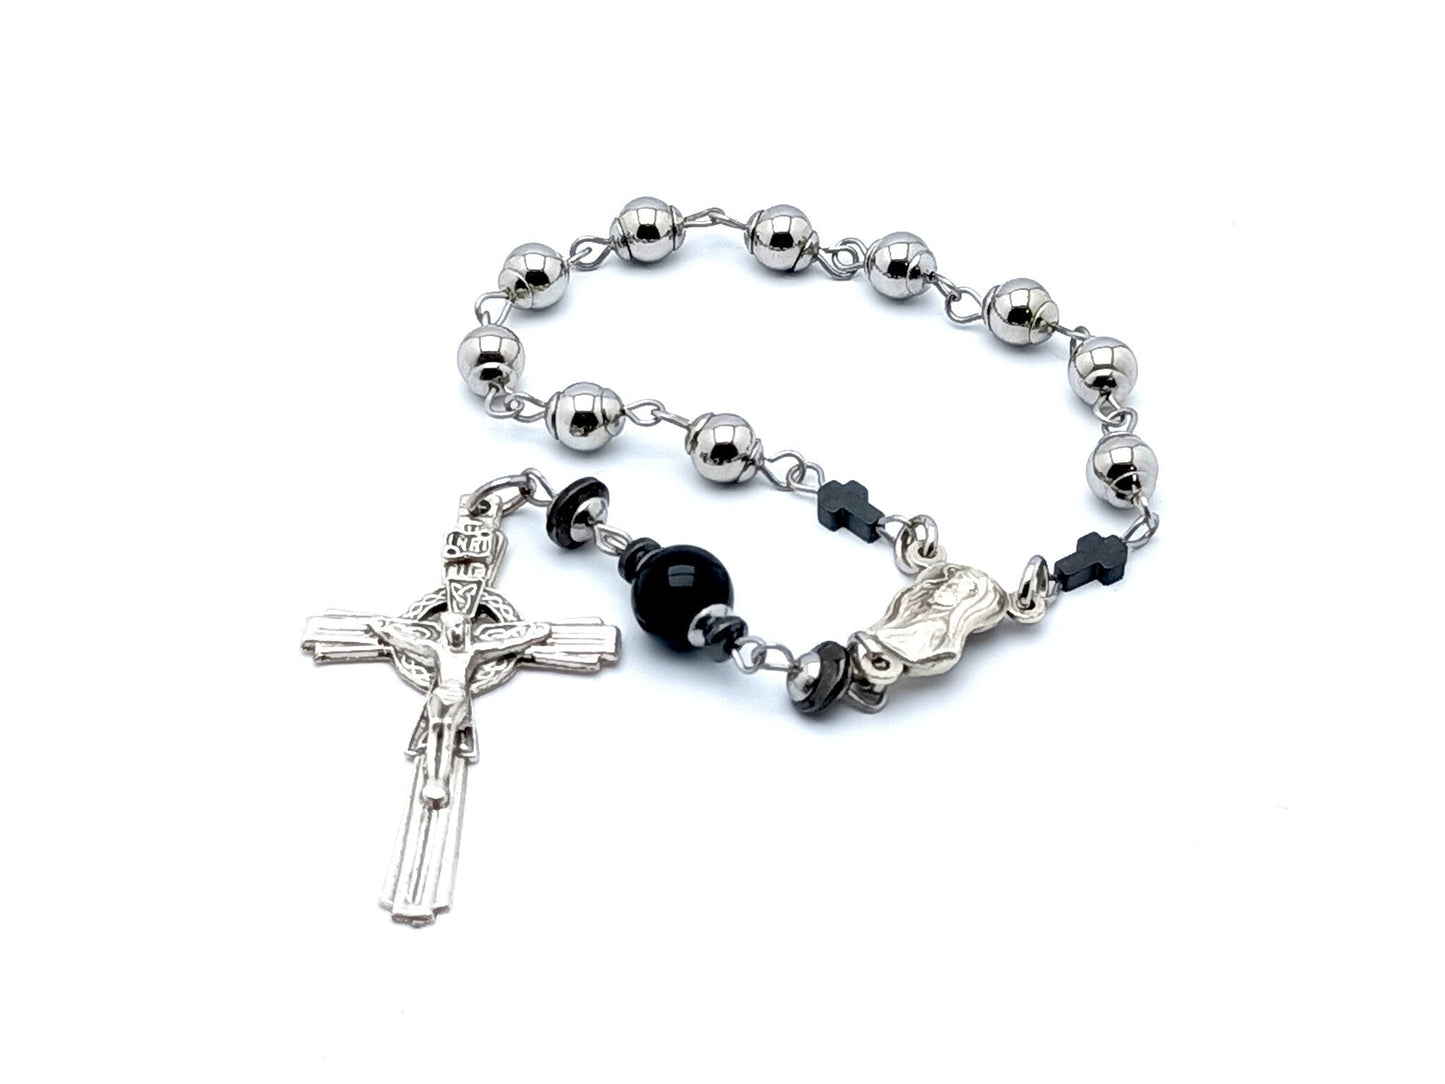 Crown of Thorns unqiue rosary beads single decade rosary with stainless steel and hematite beads, silver Crown of Thorns crucifix and centre medal.